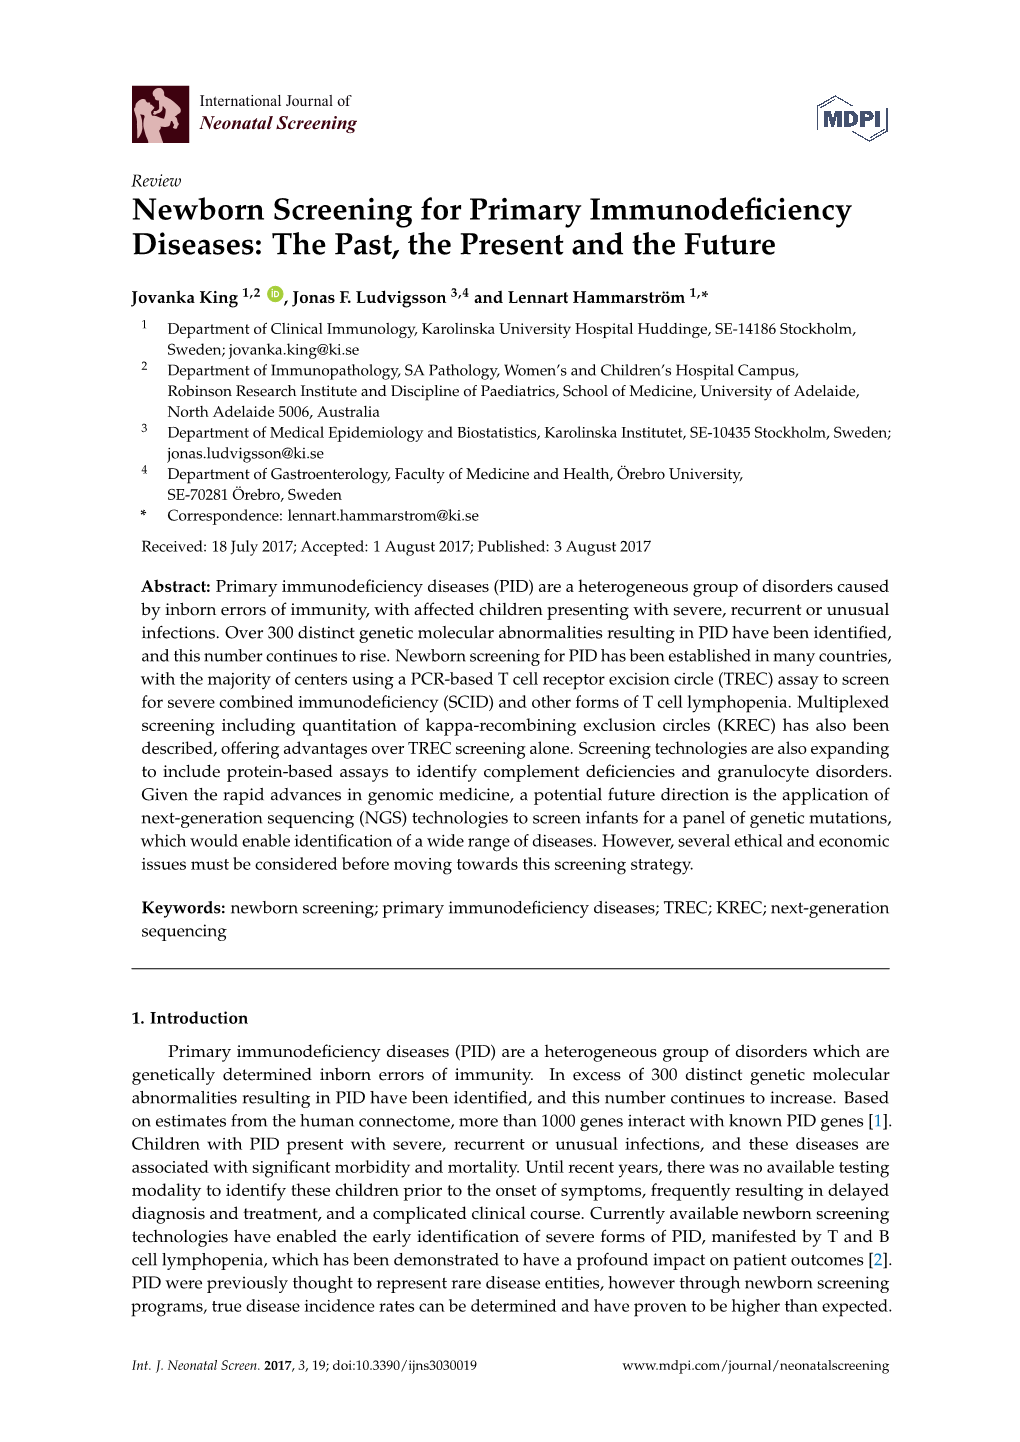 Newborn Screening for Primary Immunodeficiency Diseases: the Past, the Present and the Future